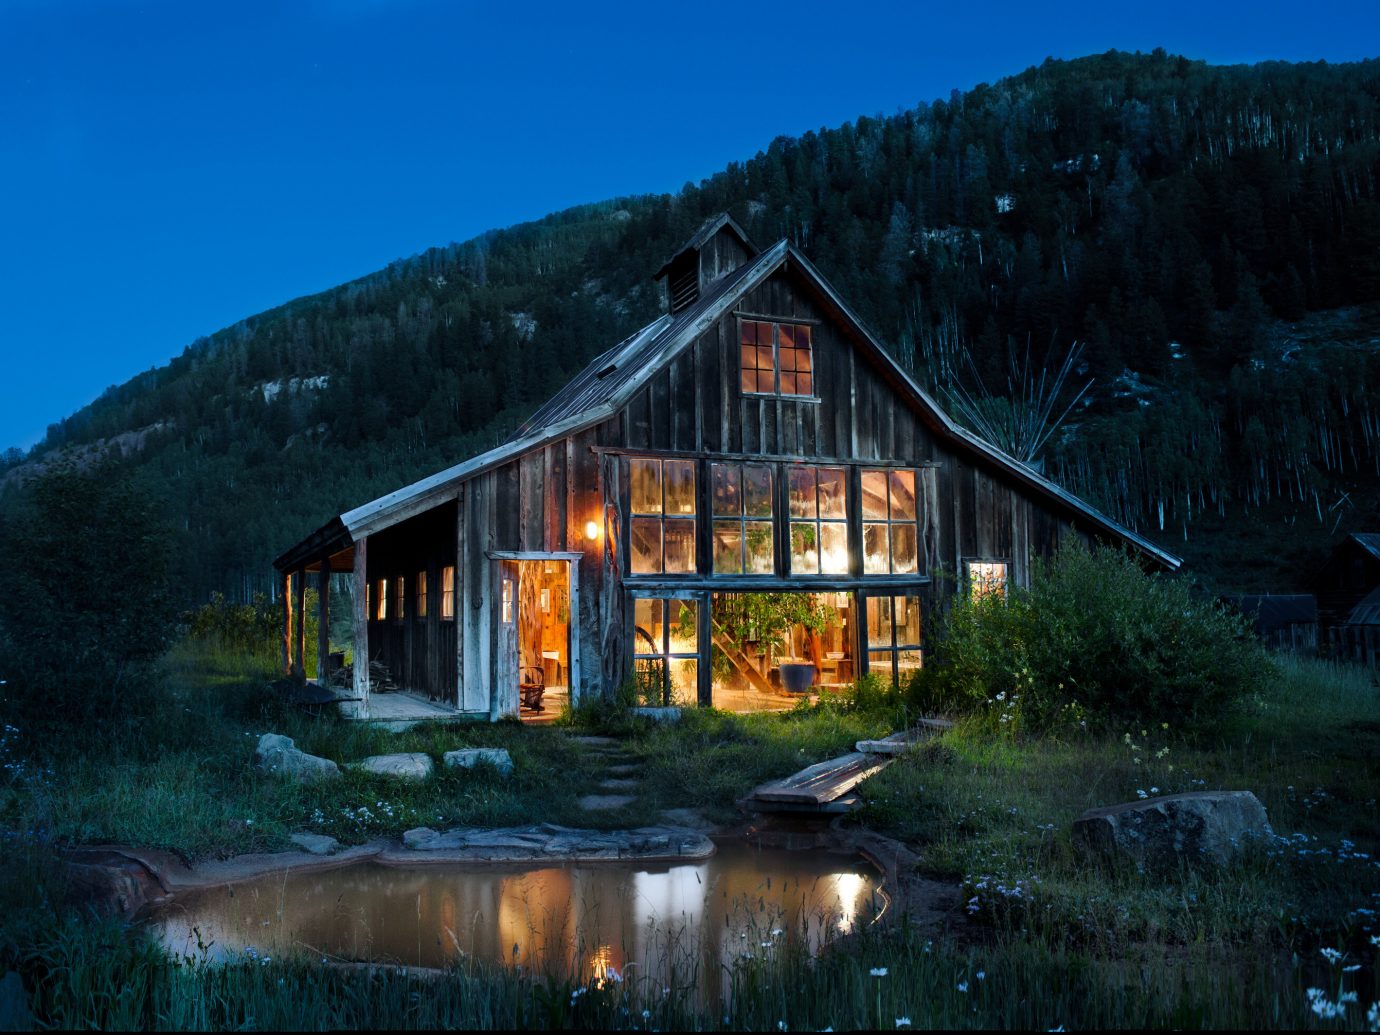 Boutique Hotels Fall Travel Hotels Outdoors + Adventure sky outdoor Nature reflection home building cottage house mountain hut log cabin evening rural area real estate mountain range landscape Winter farmhouse tree barn night computer wallpaper water estate hillside